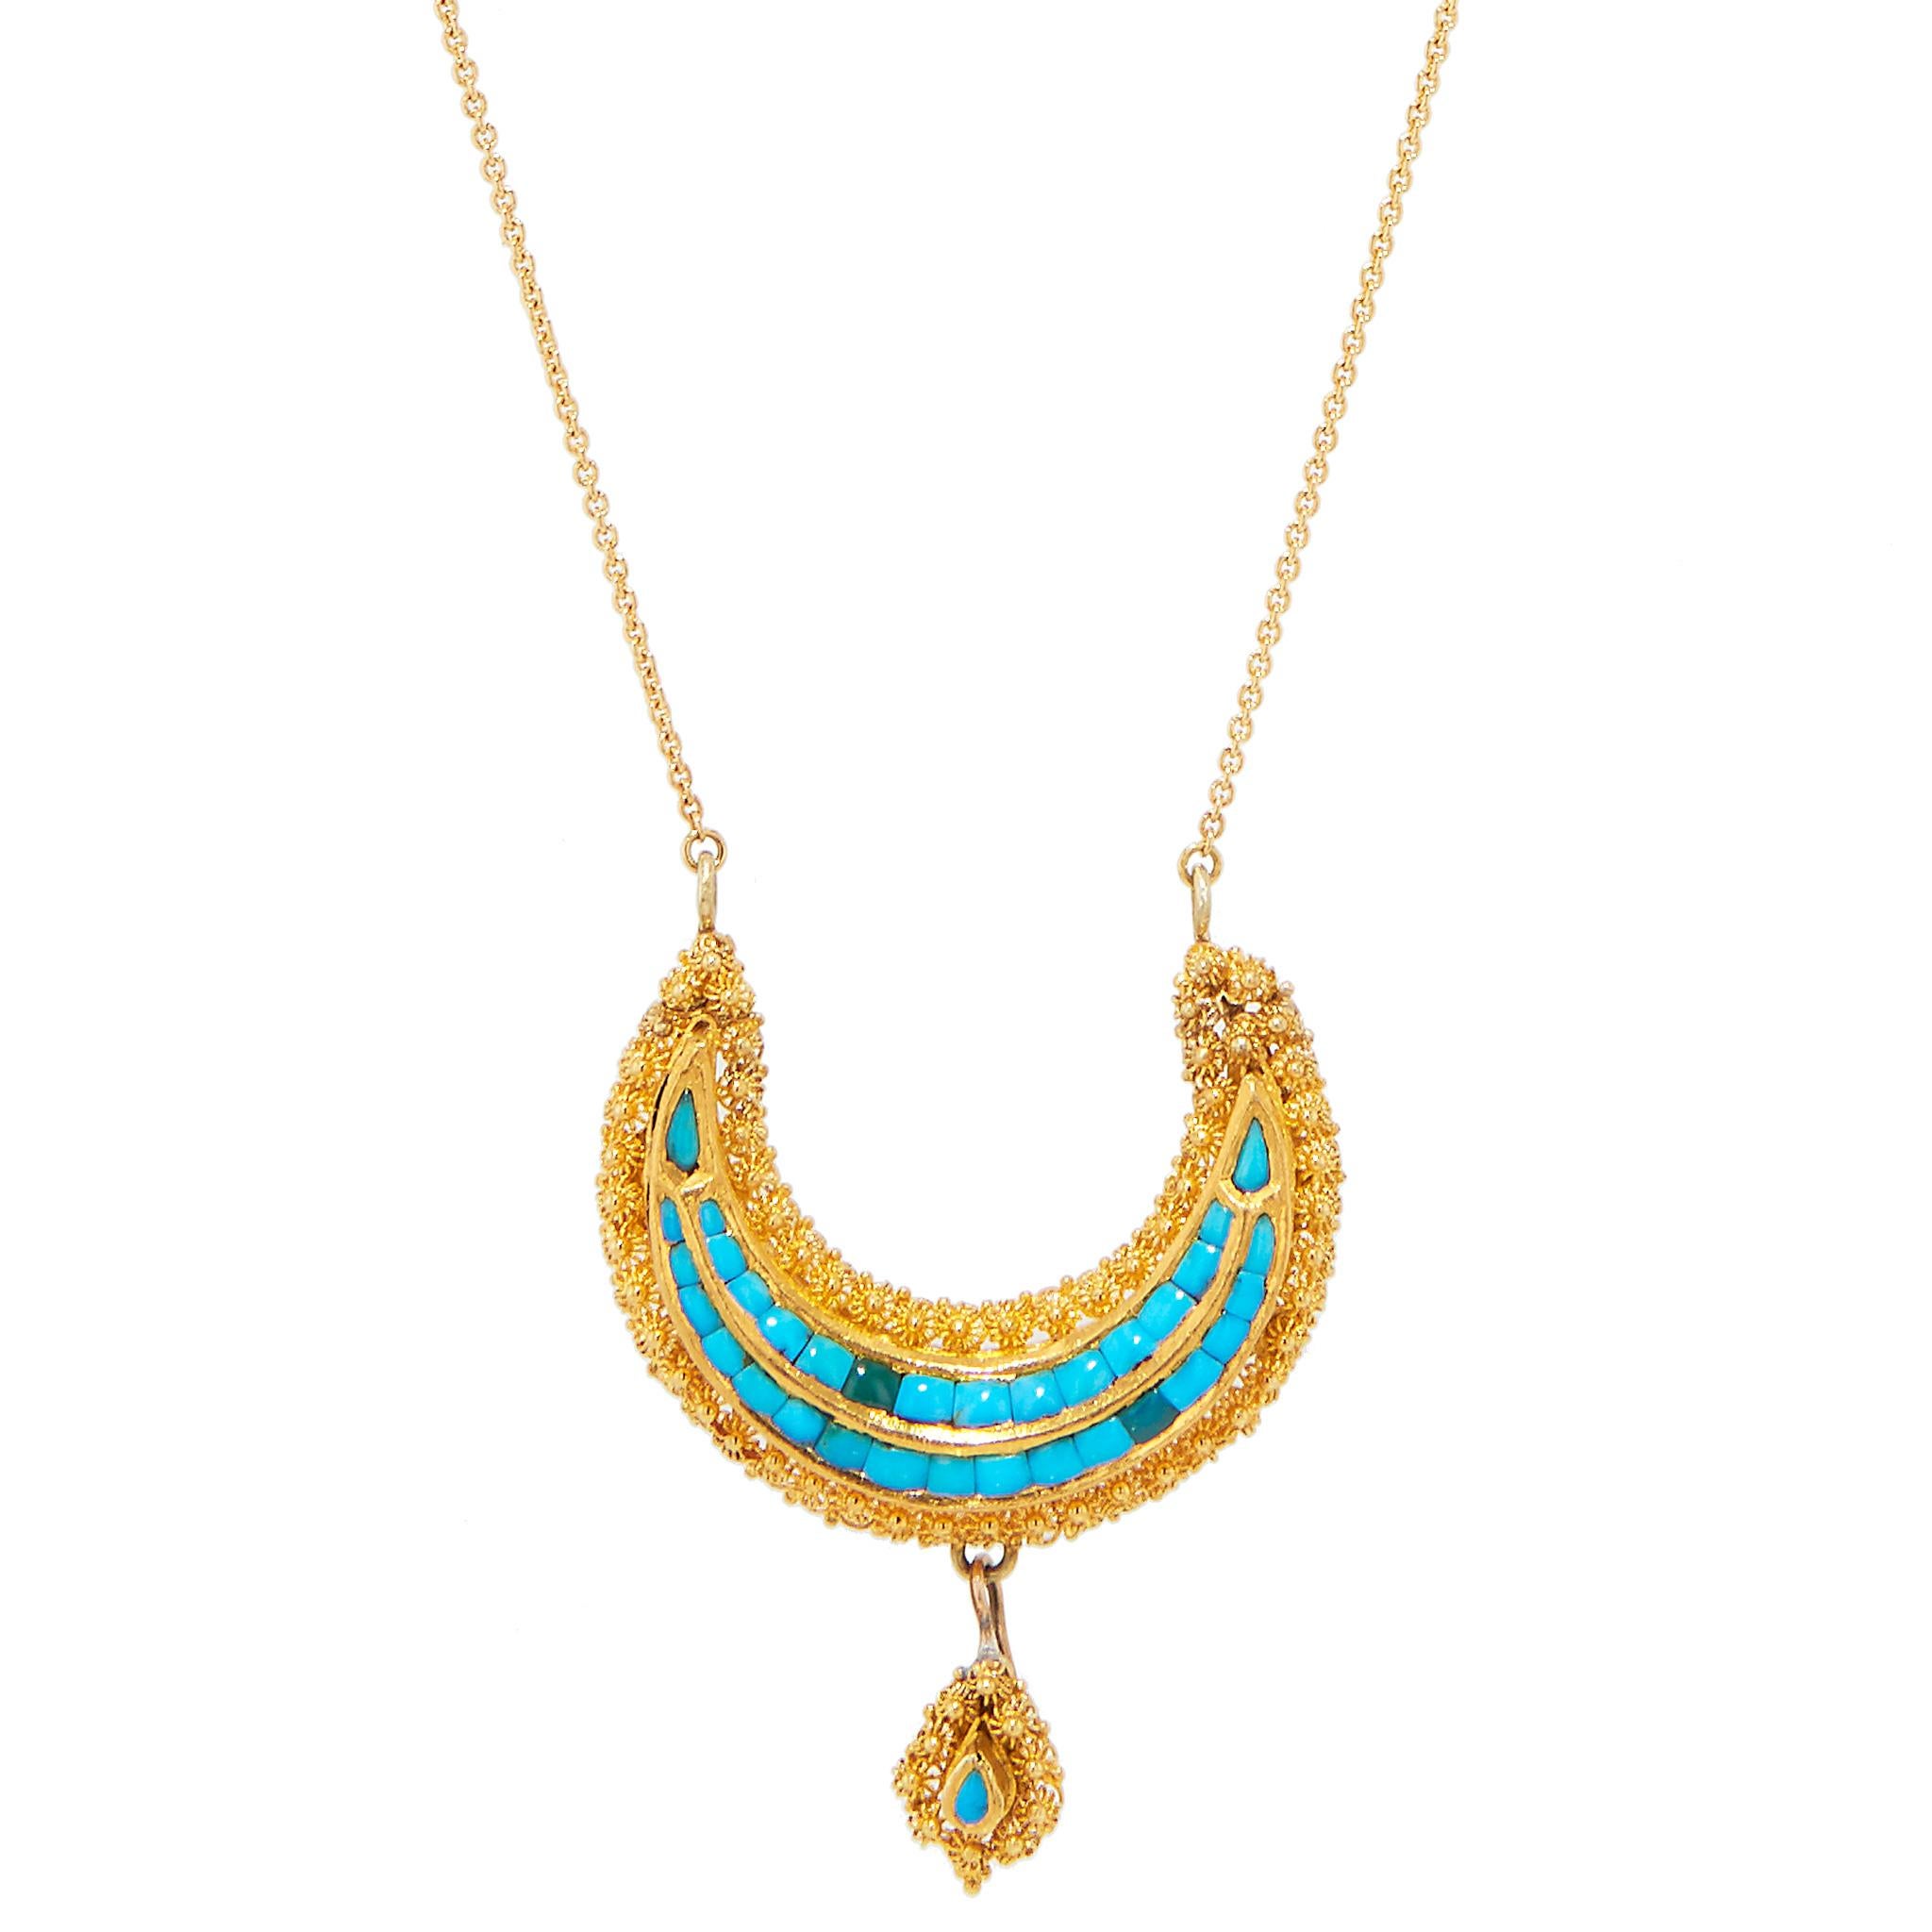 This gorgeous Victorian pendant is handcrafted in 15 karat yellow gold with natural turquoise. 

The pendant hangs from a new 18 karat yellow chain. The necklace and pendant measure 19 inches long. Each chain, on the right and left measure 8 inches